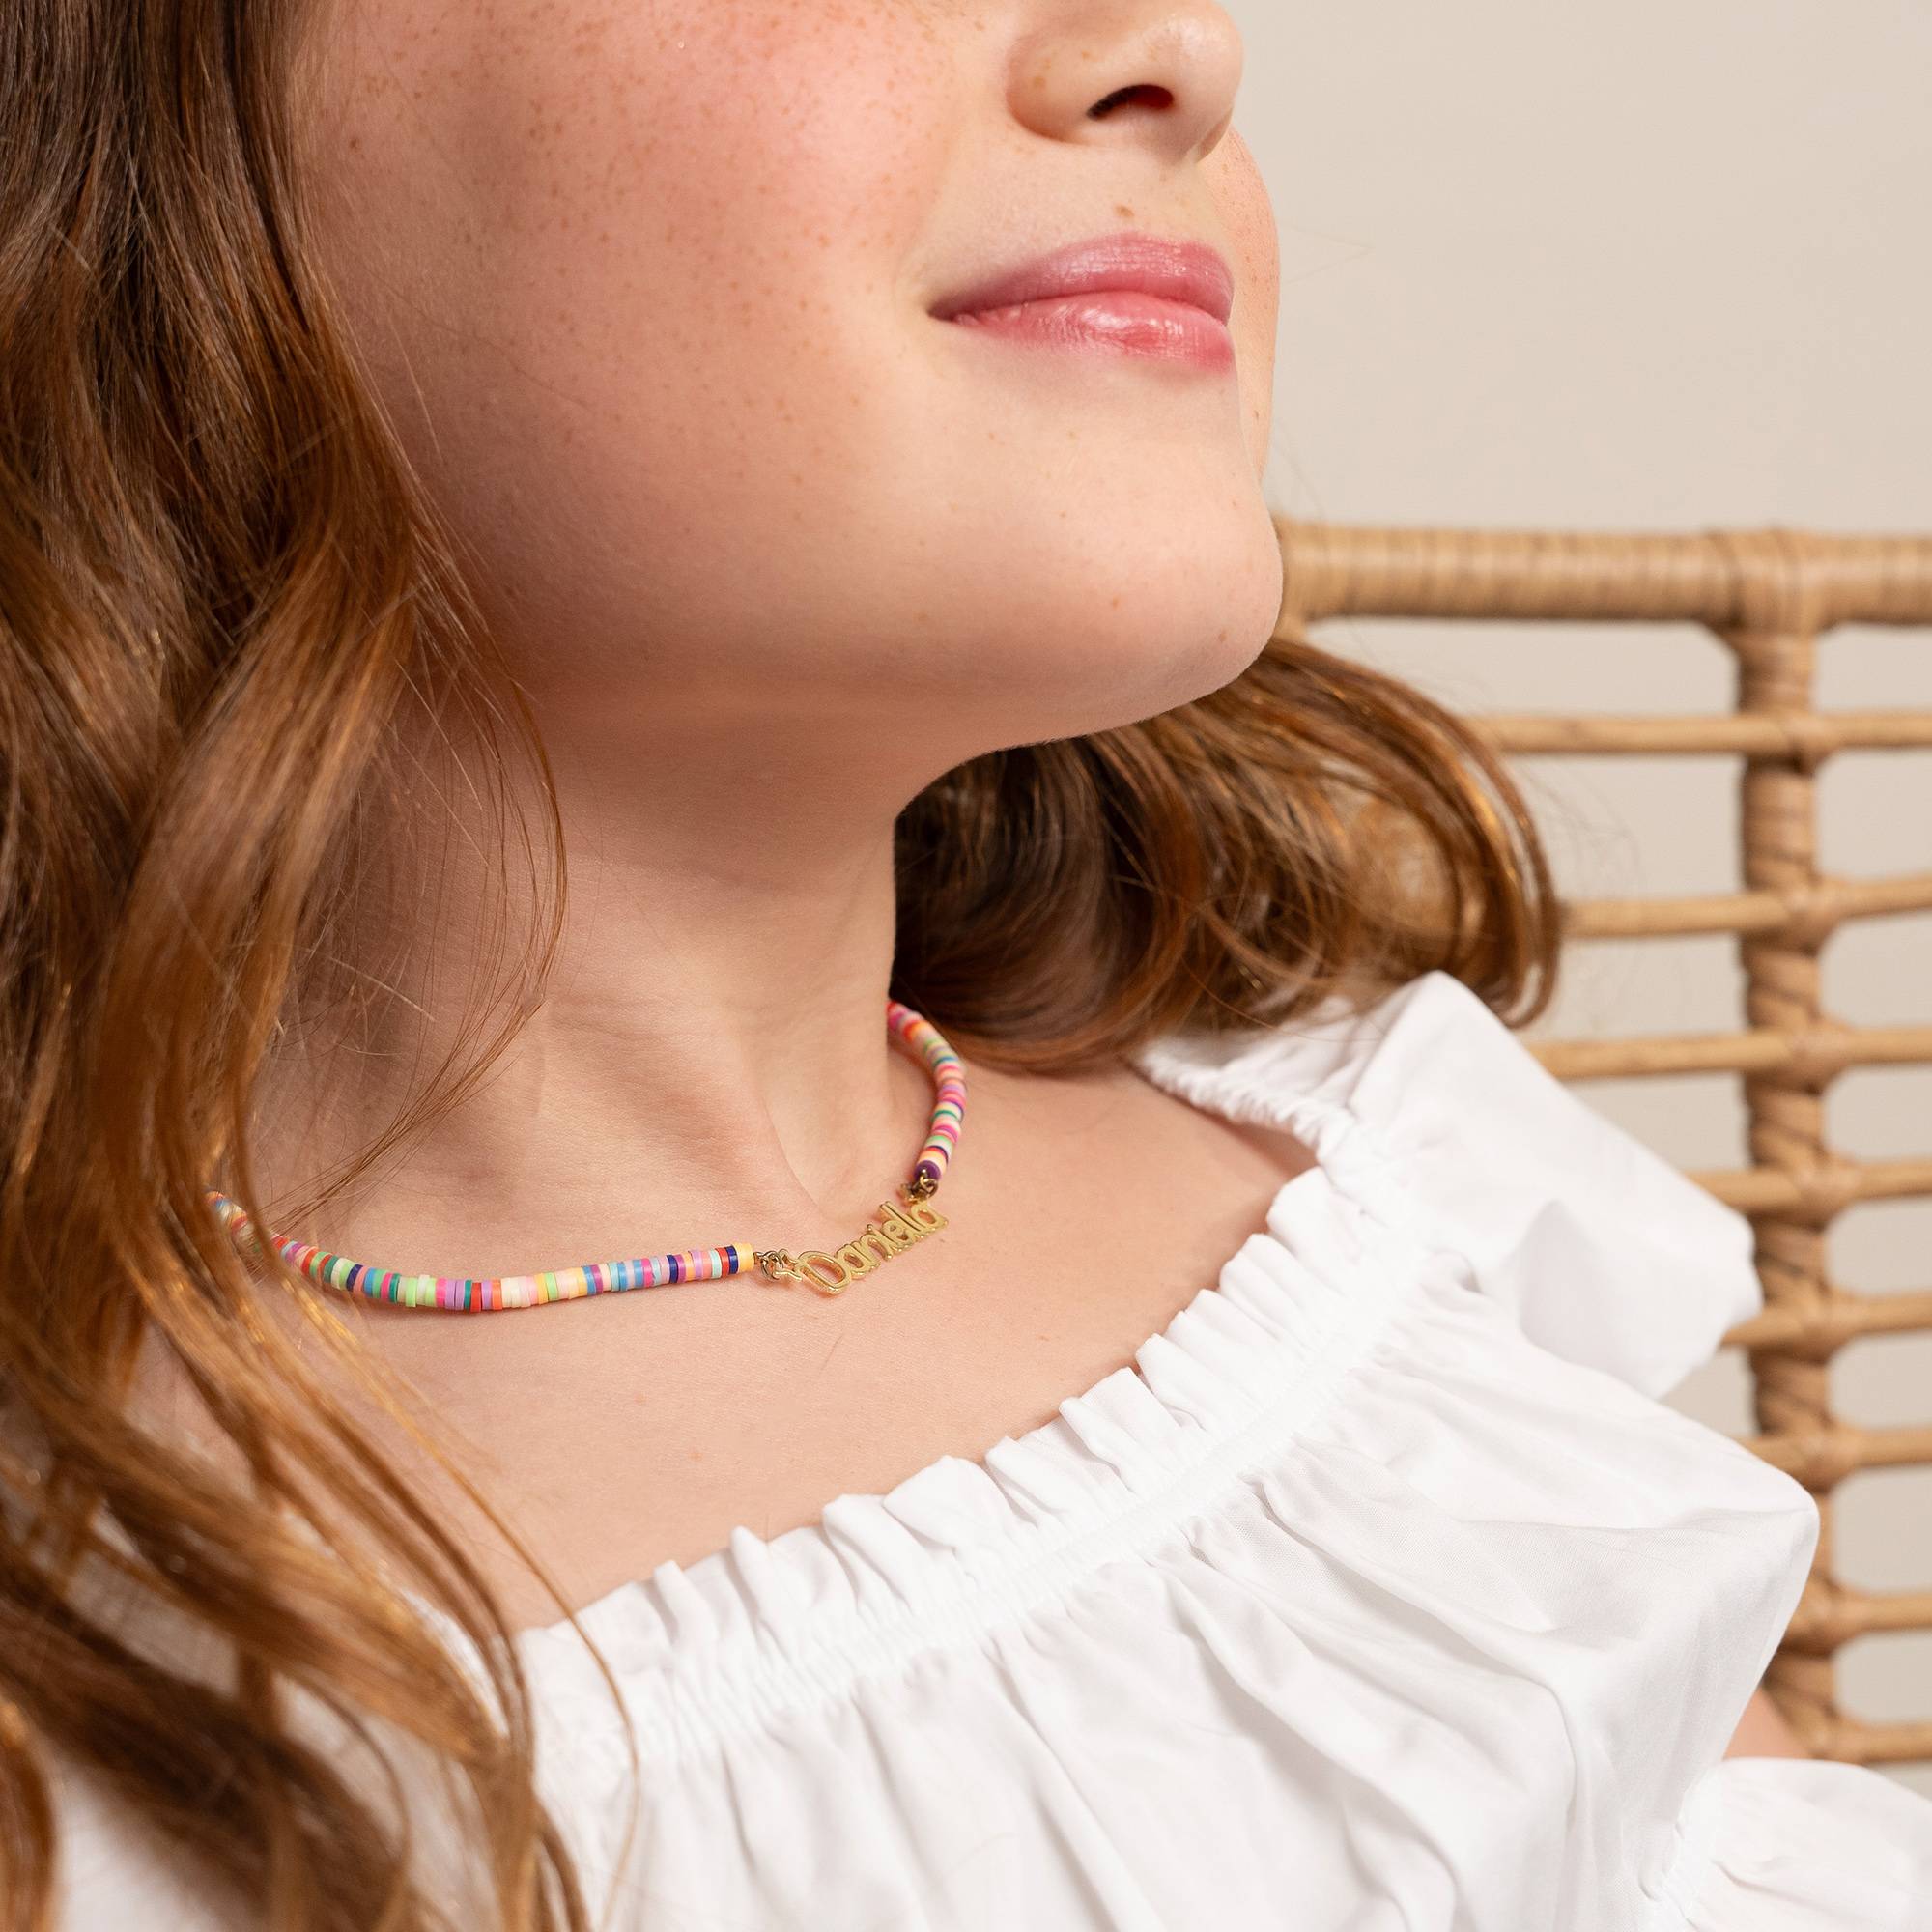 Rainbow Magic Girls Name Necklace in Gold Plating-5 product photo